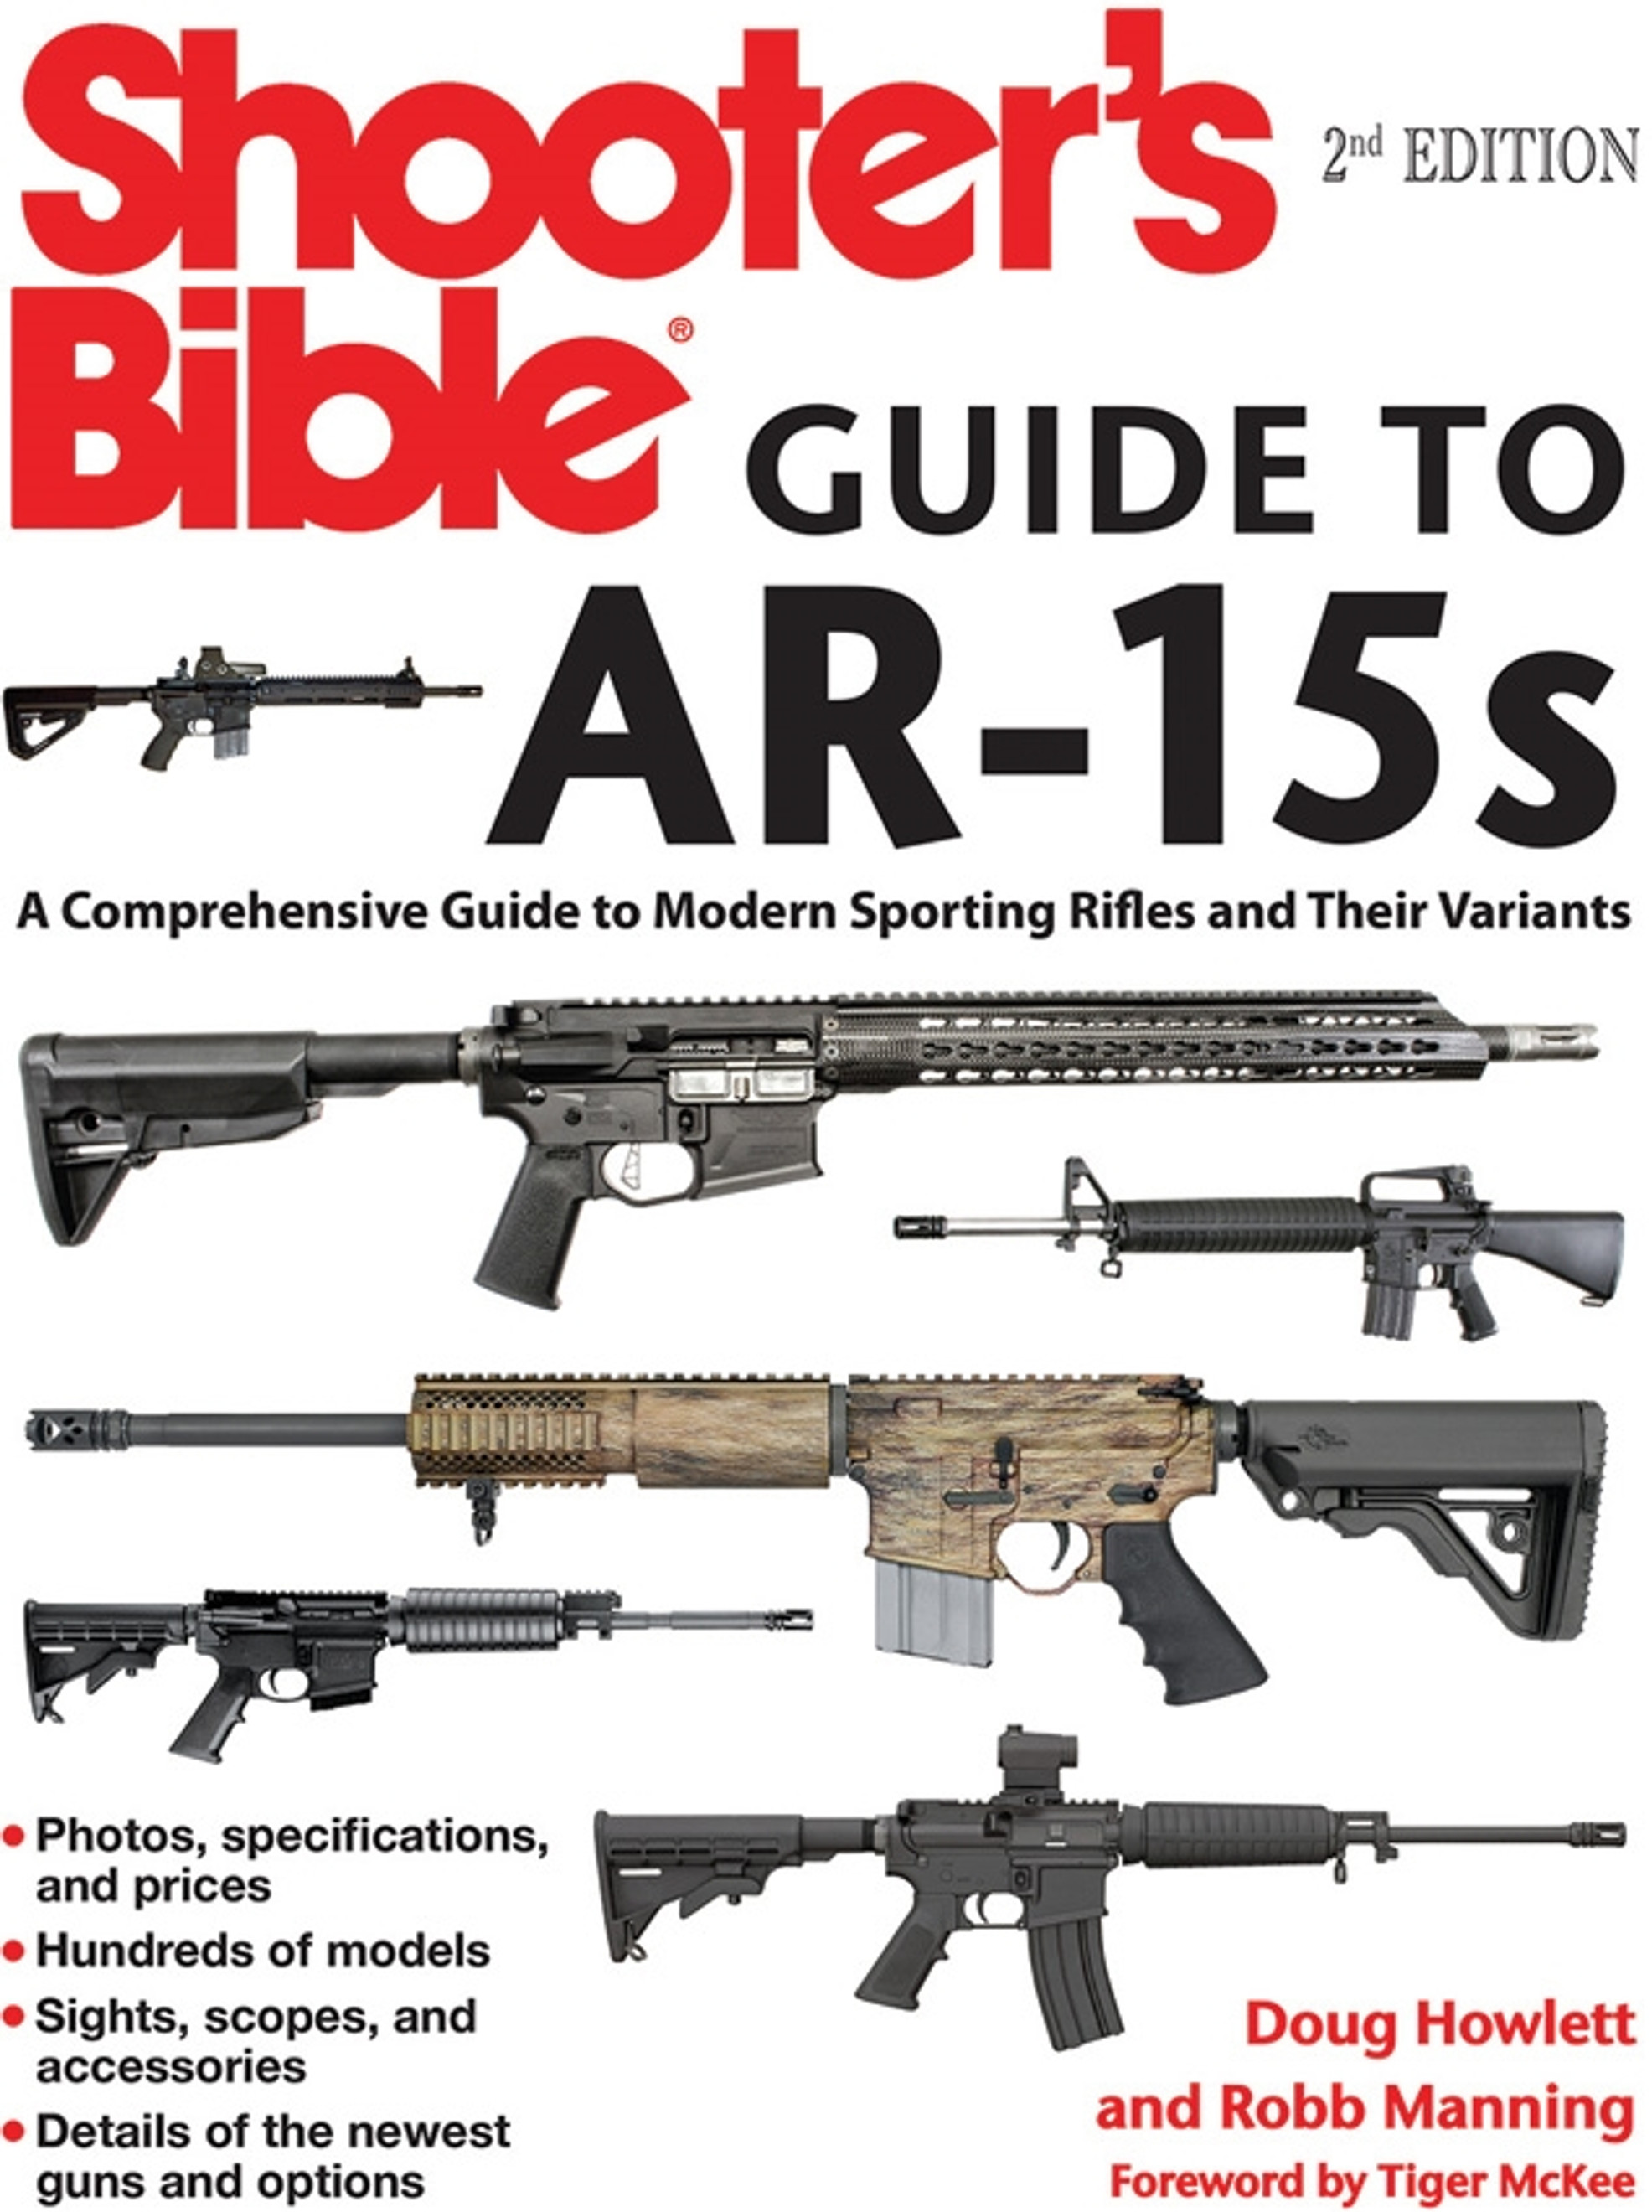 Shooters Bible Guide to AR-15